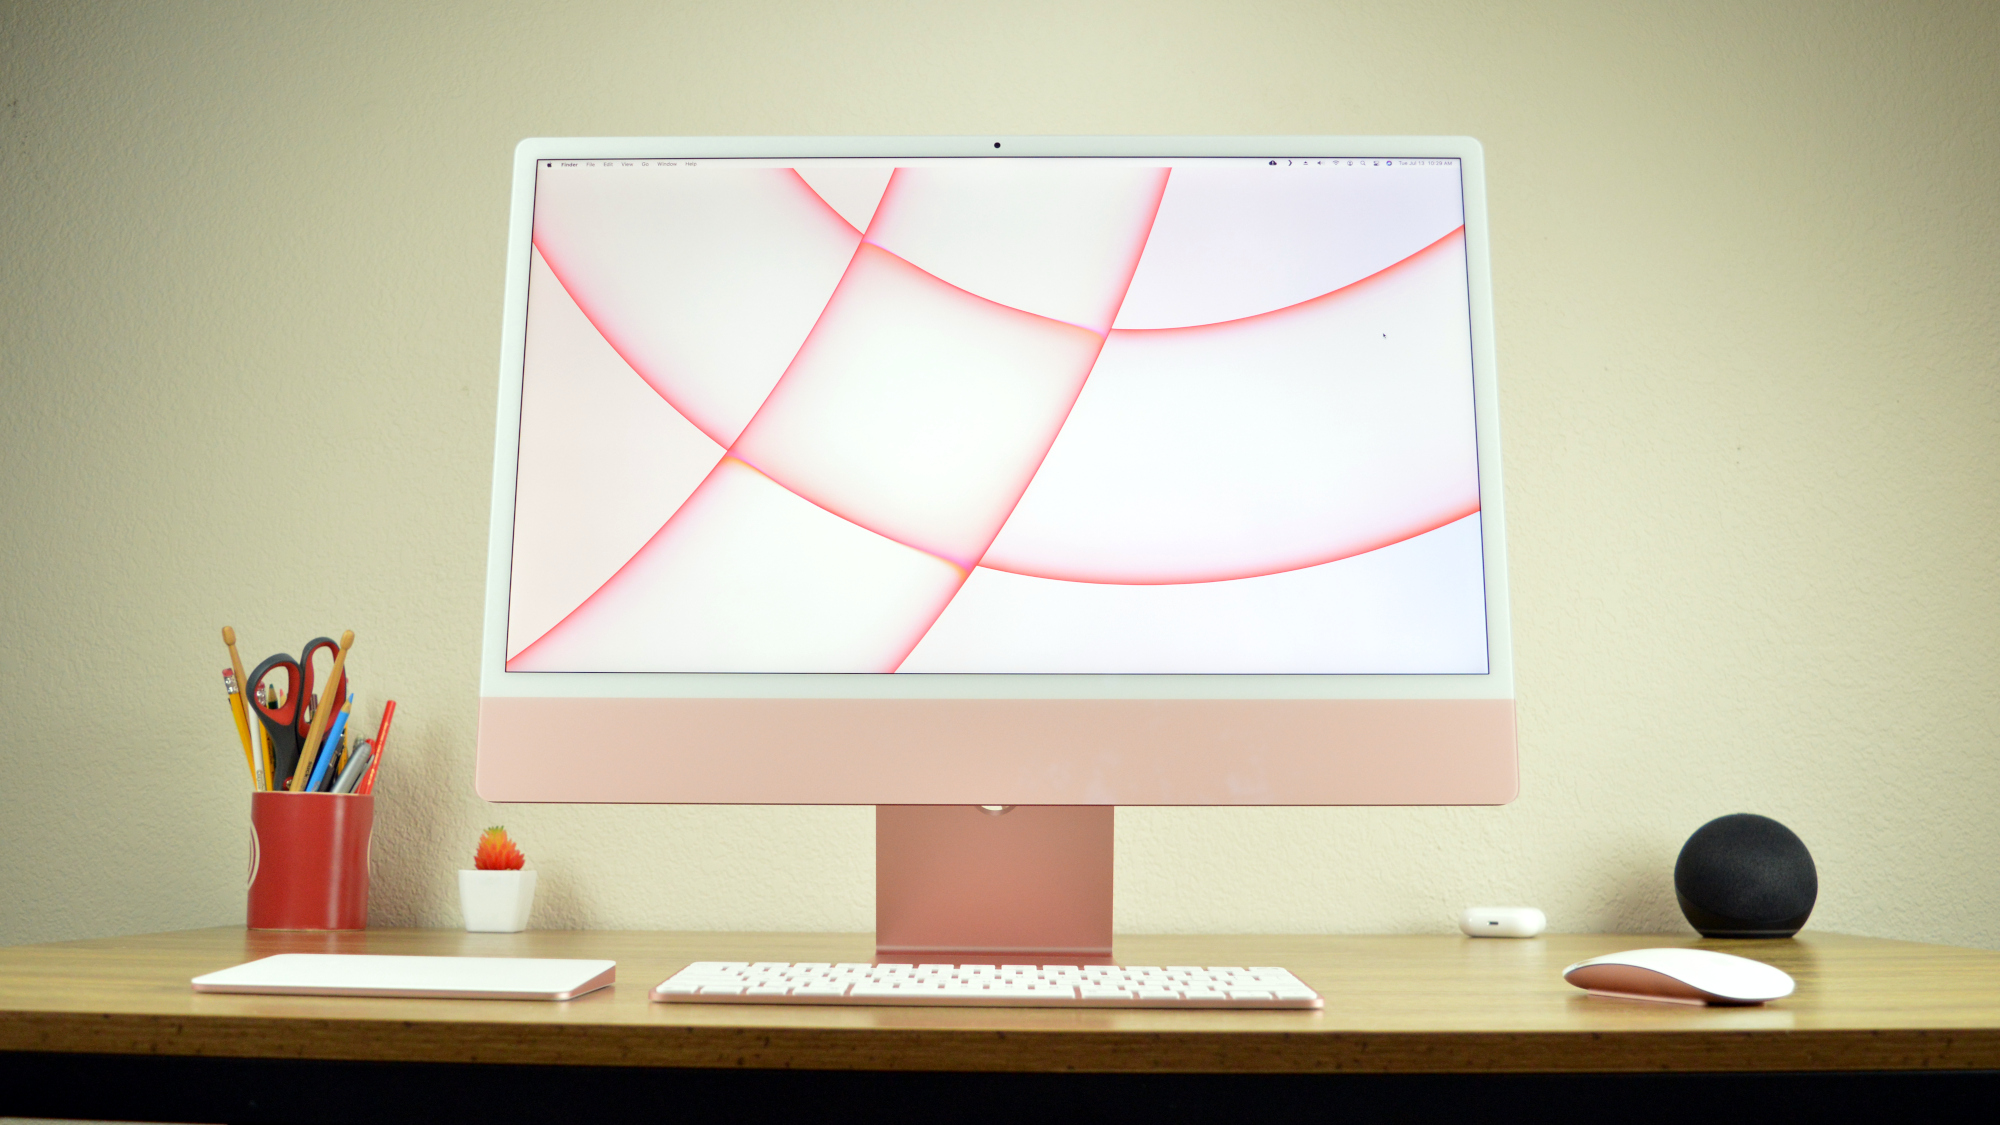 Apple iMac 2021 24-inch Review: The Multi-Colored Desktop For Most